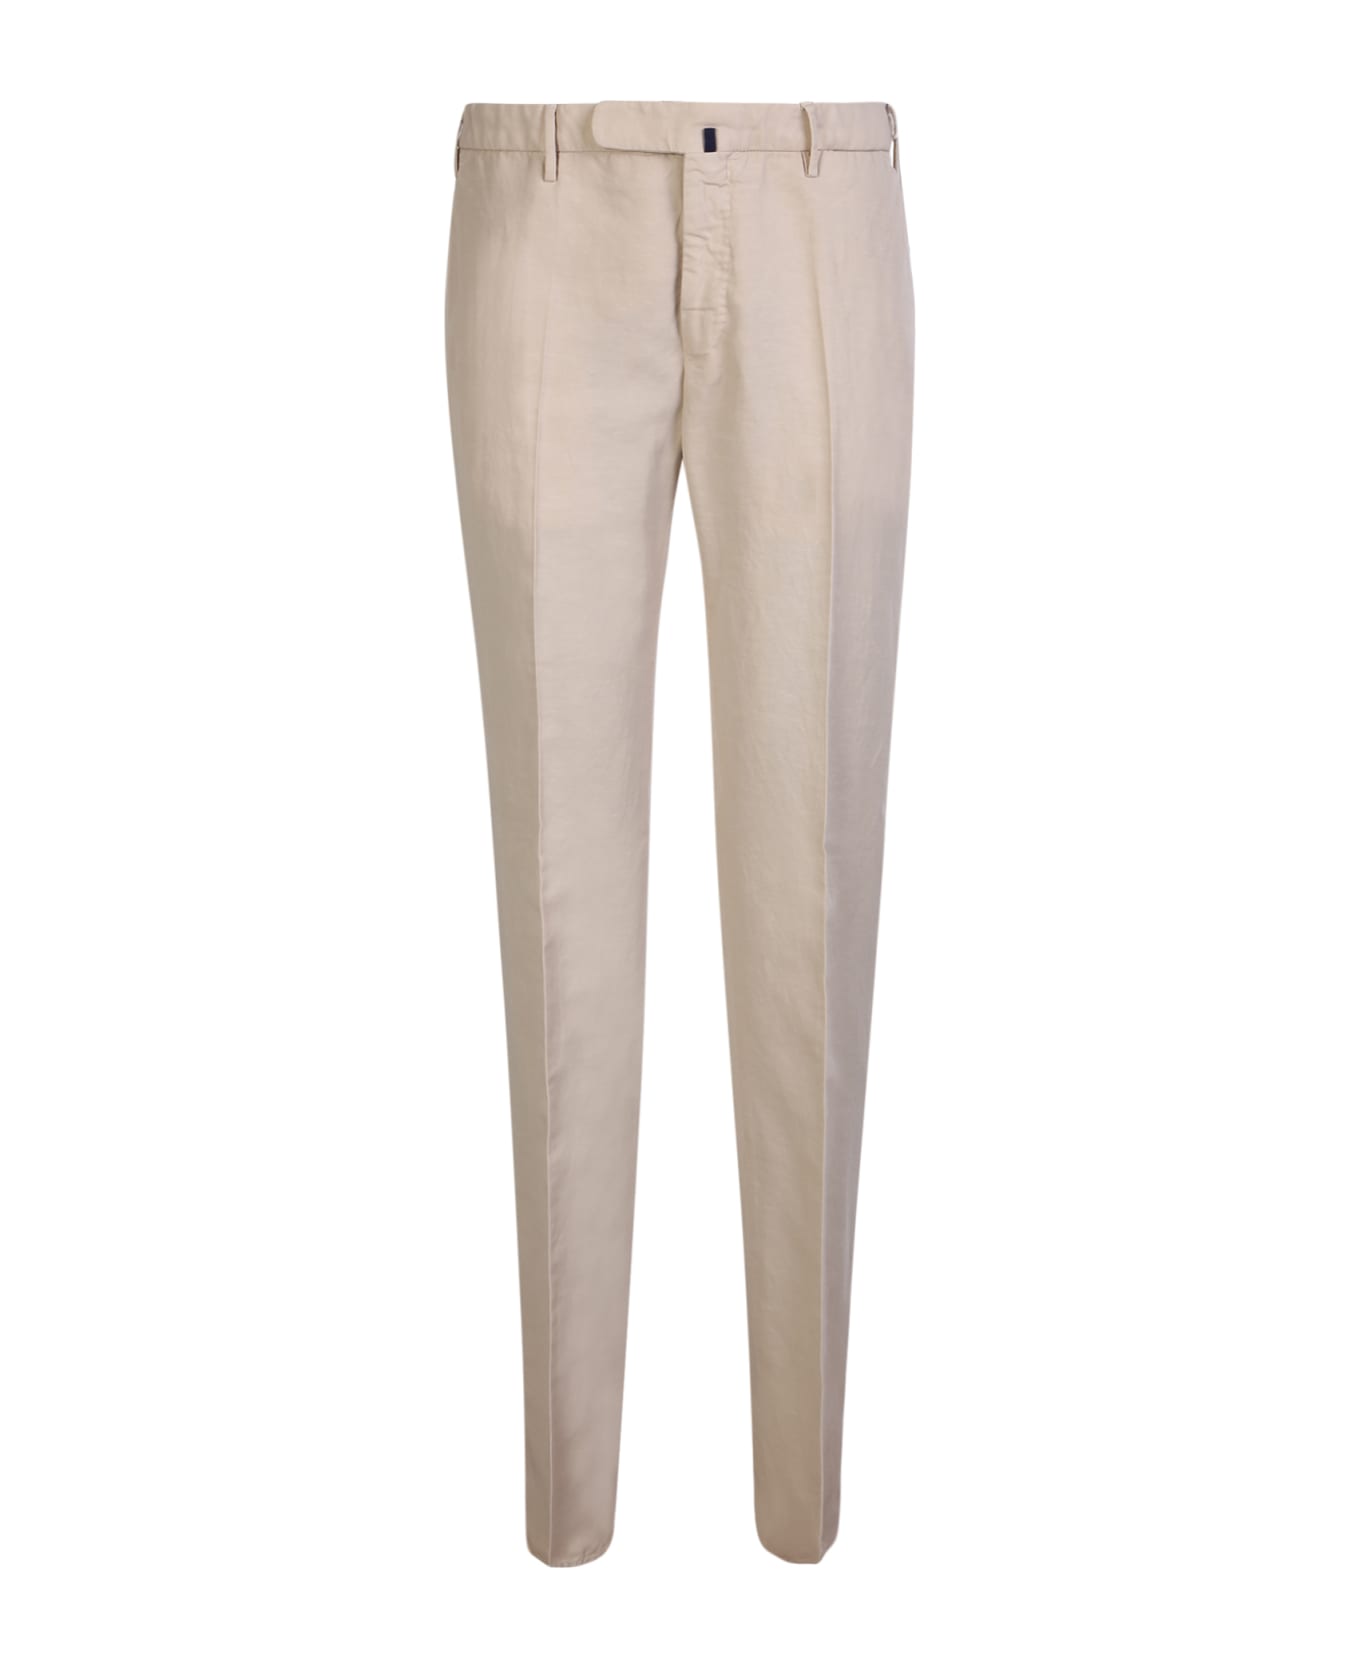 Incotex Grey Tailored Trousers - Grey